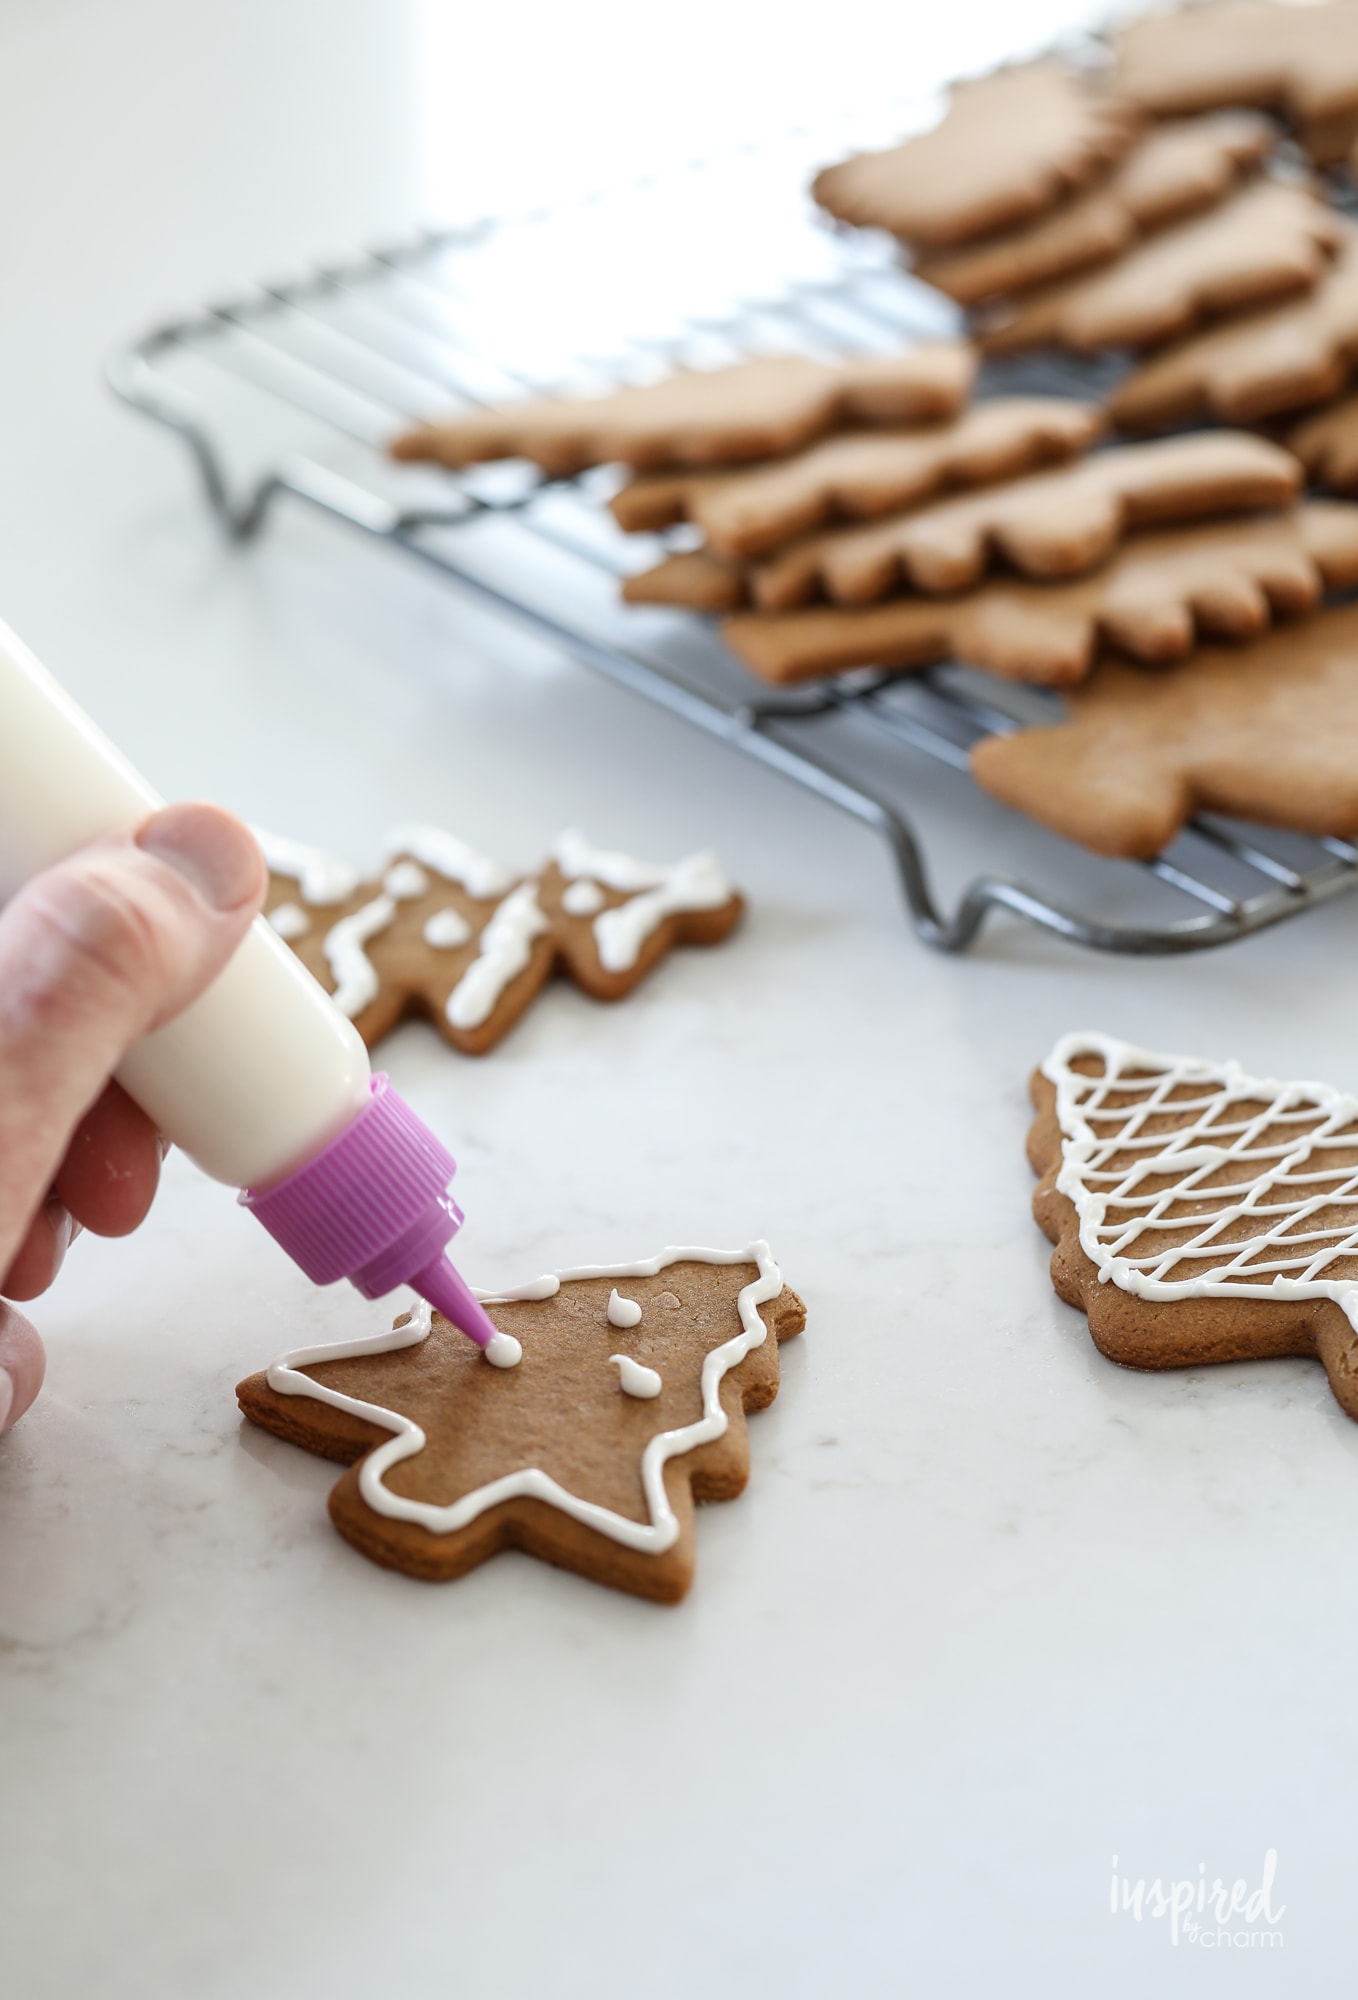 Delicious and festive Gingerbread Cookies! #christmas #cookies #gingerbread 